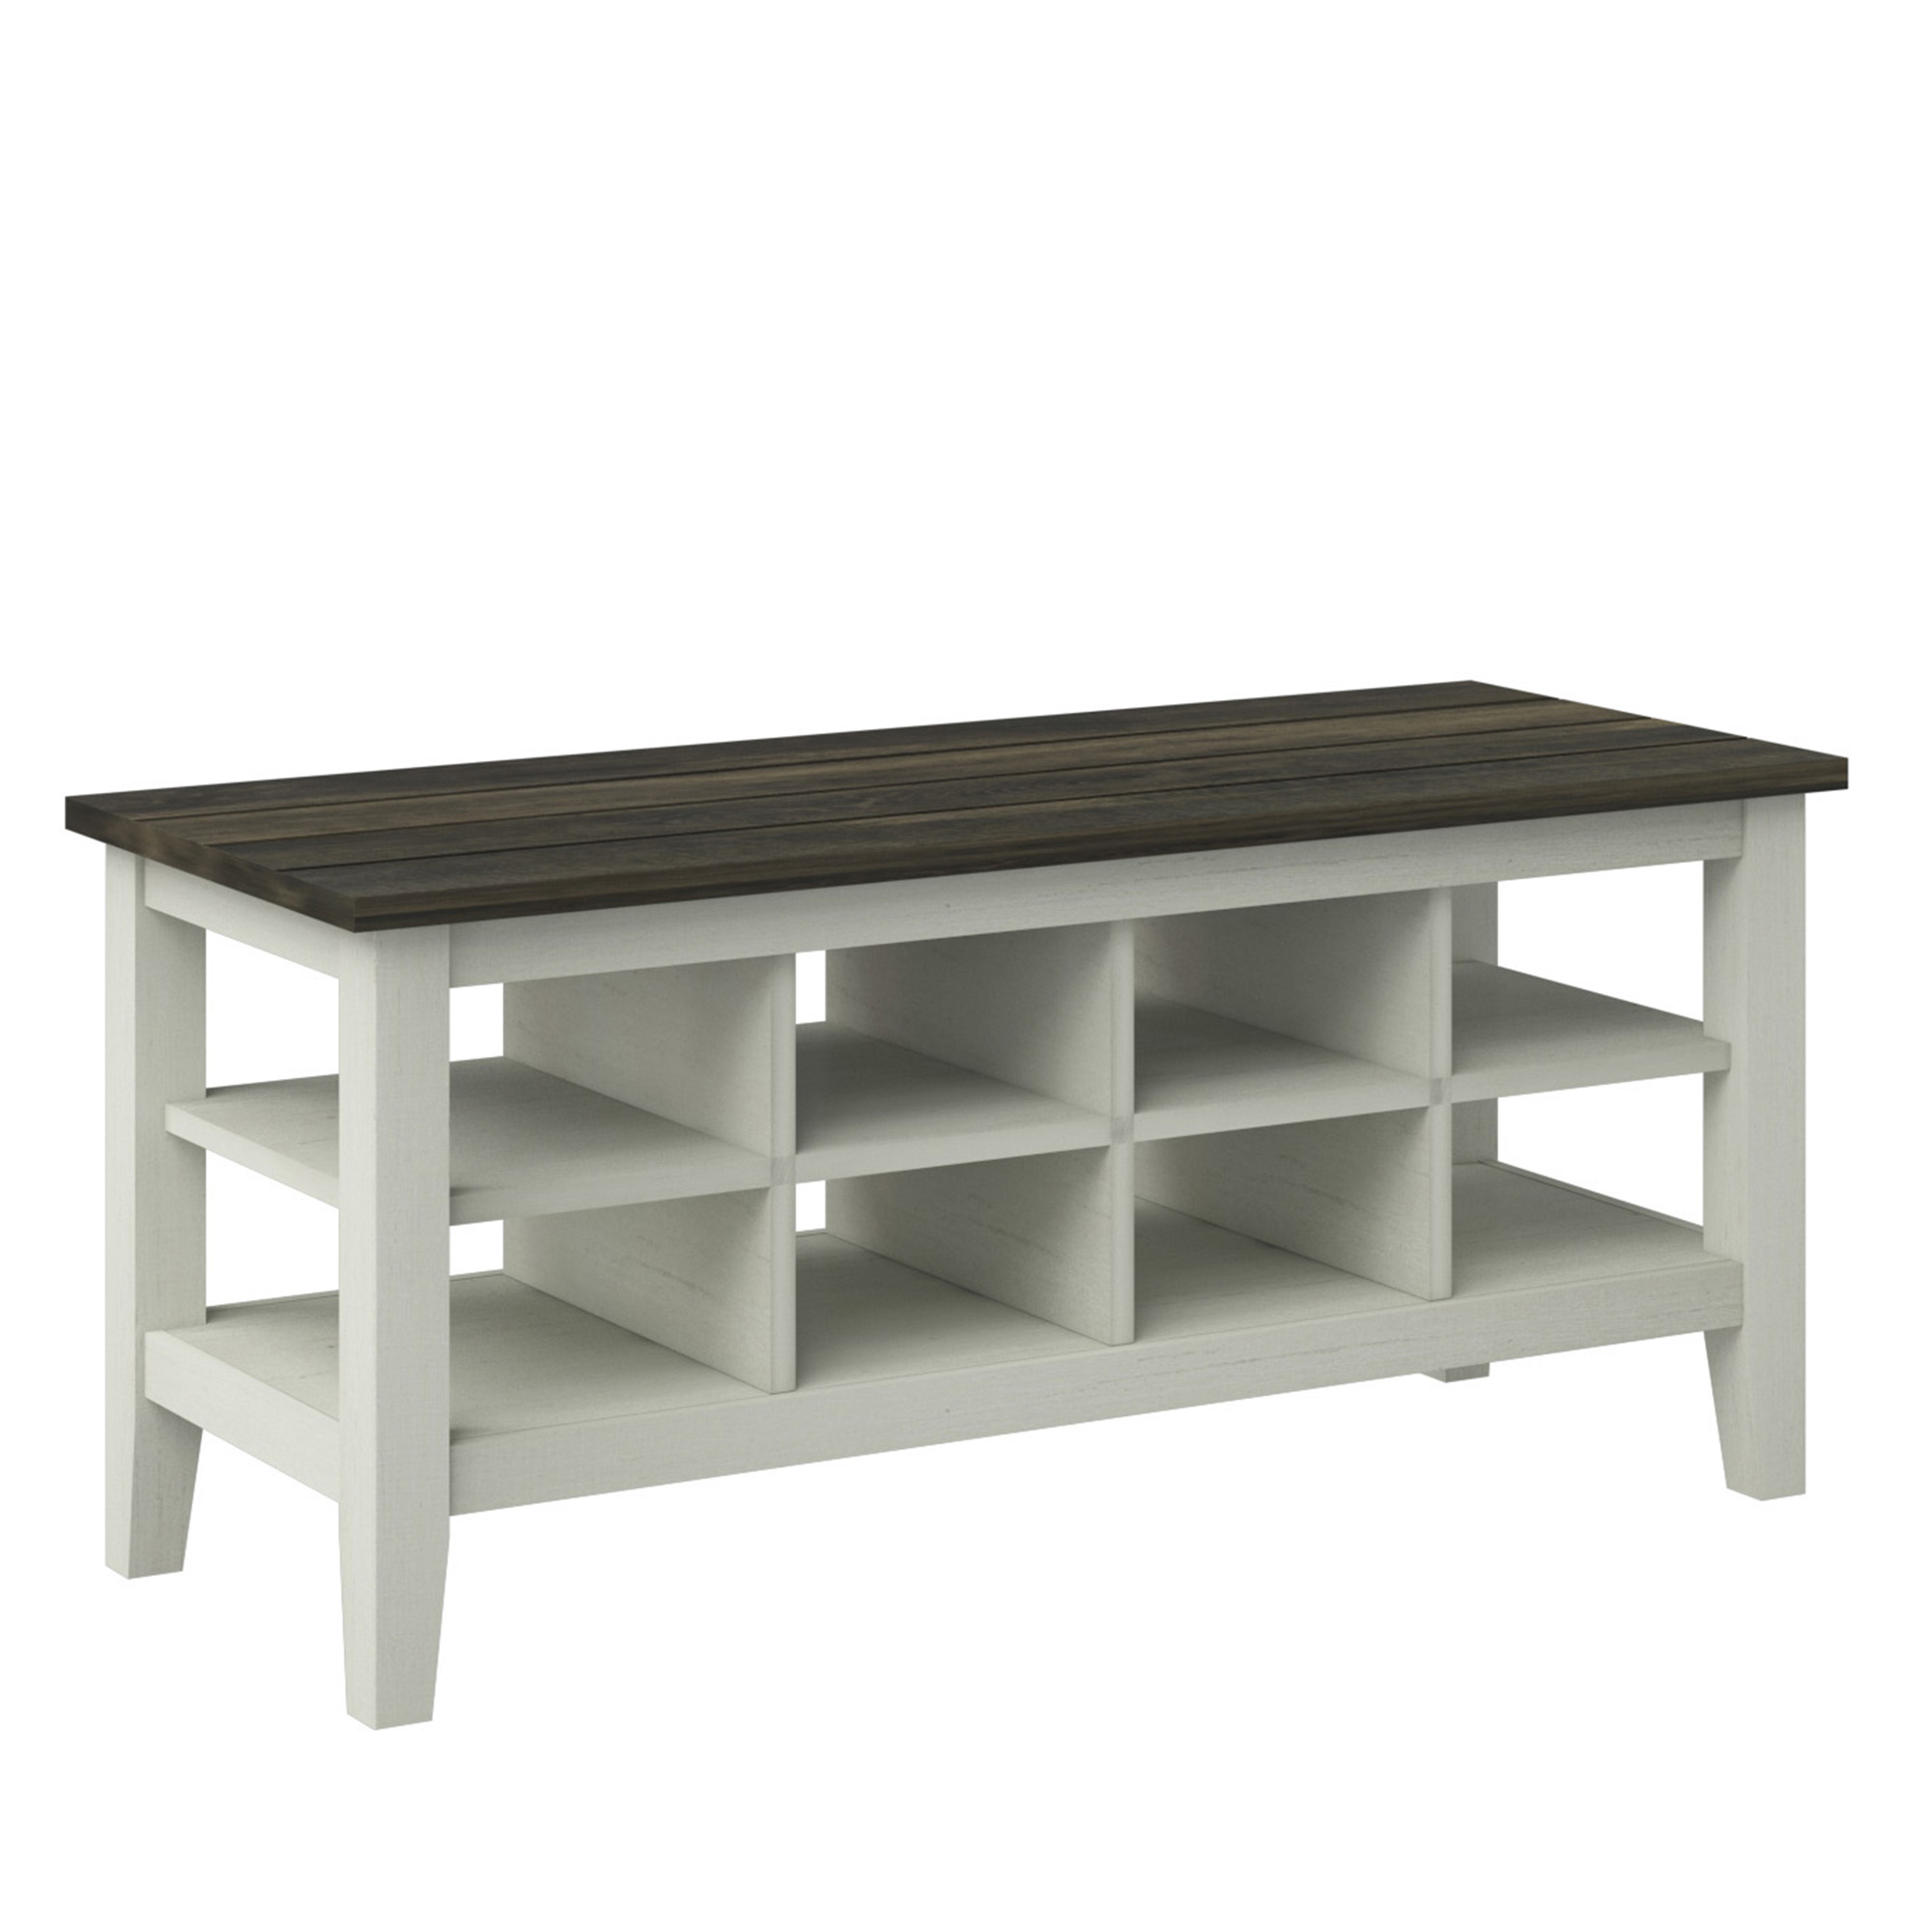 Twin Star Home Two-Tone Storage Bench with Planked Top in Old Wood White, 40”W x 15.5”D x 17.8”H - image 2 of 7